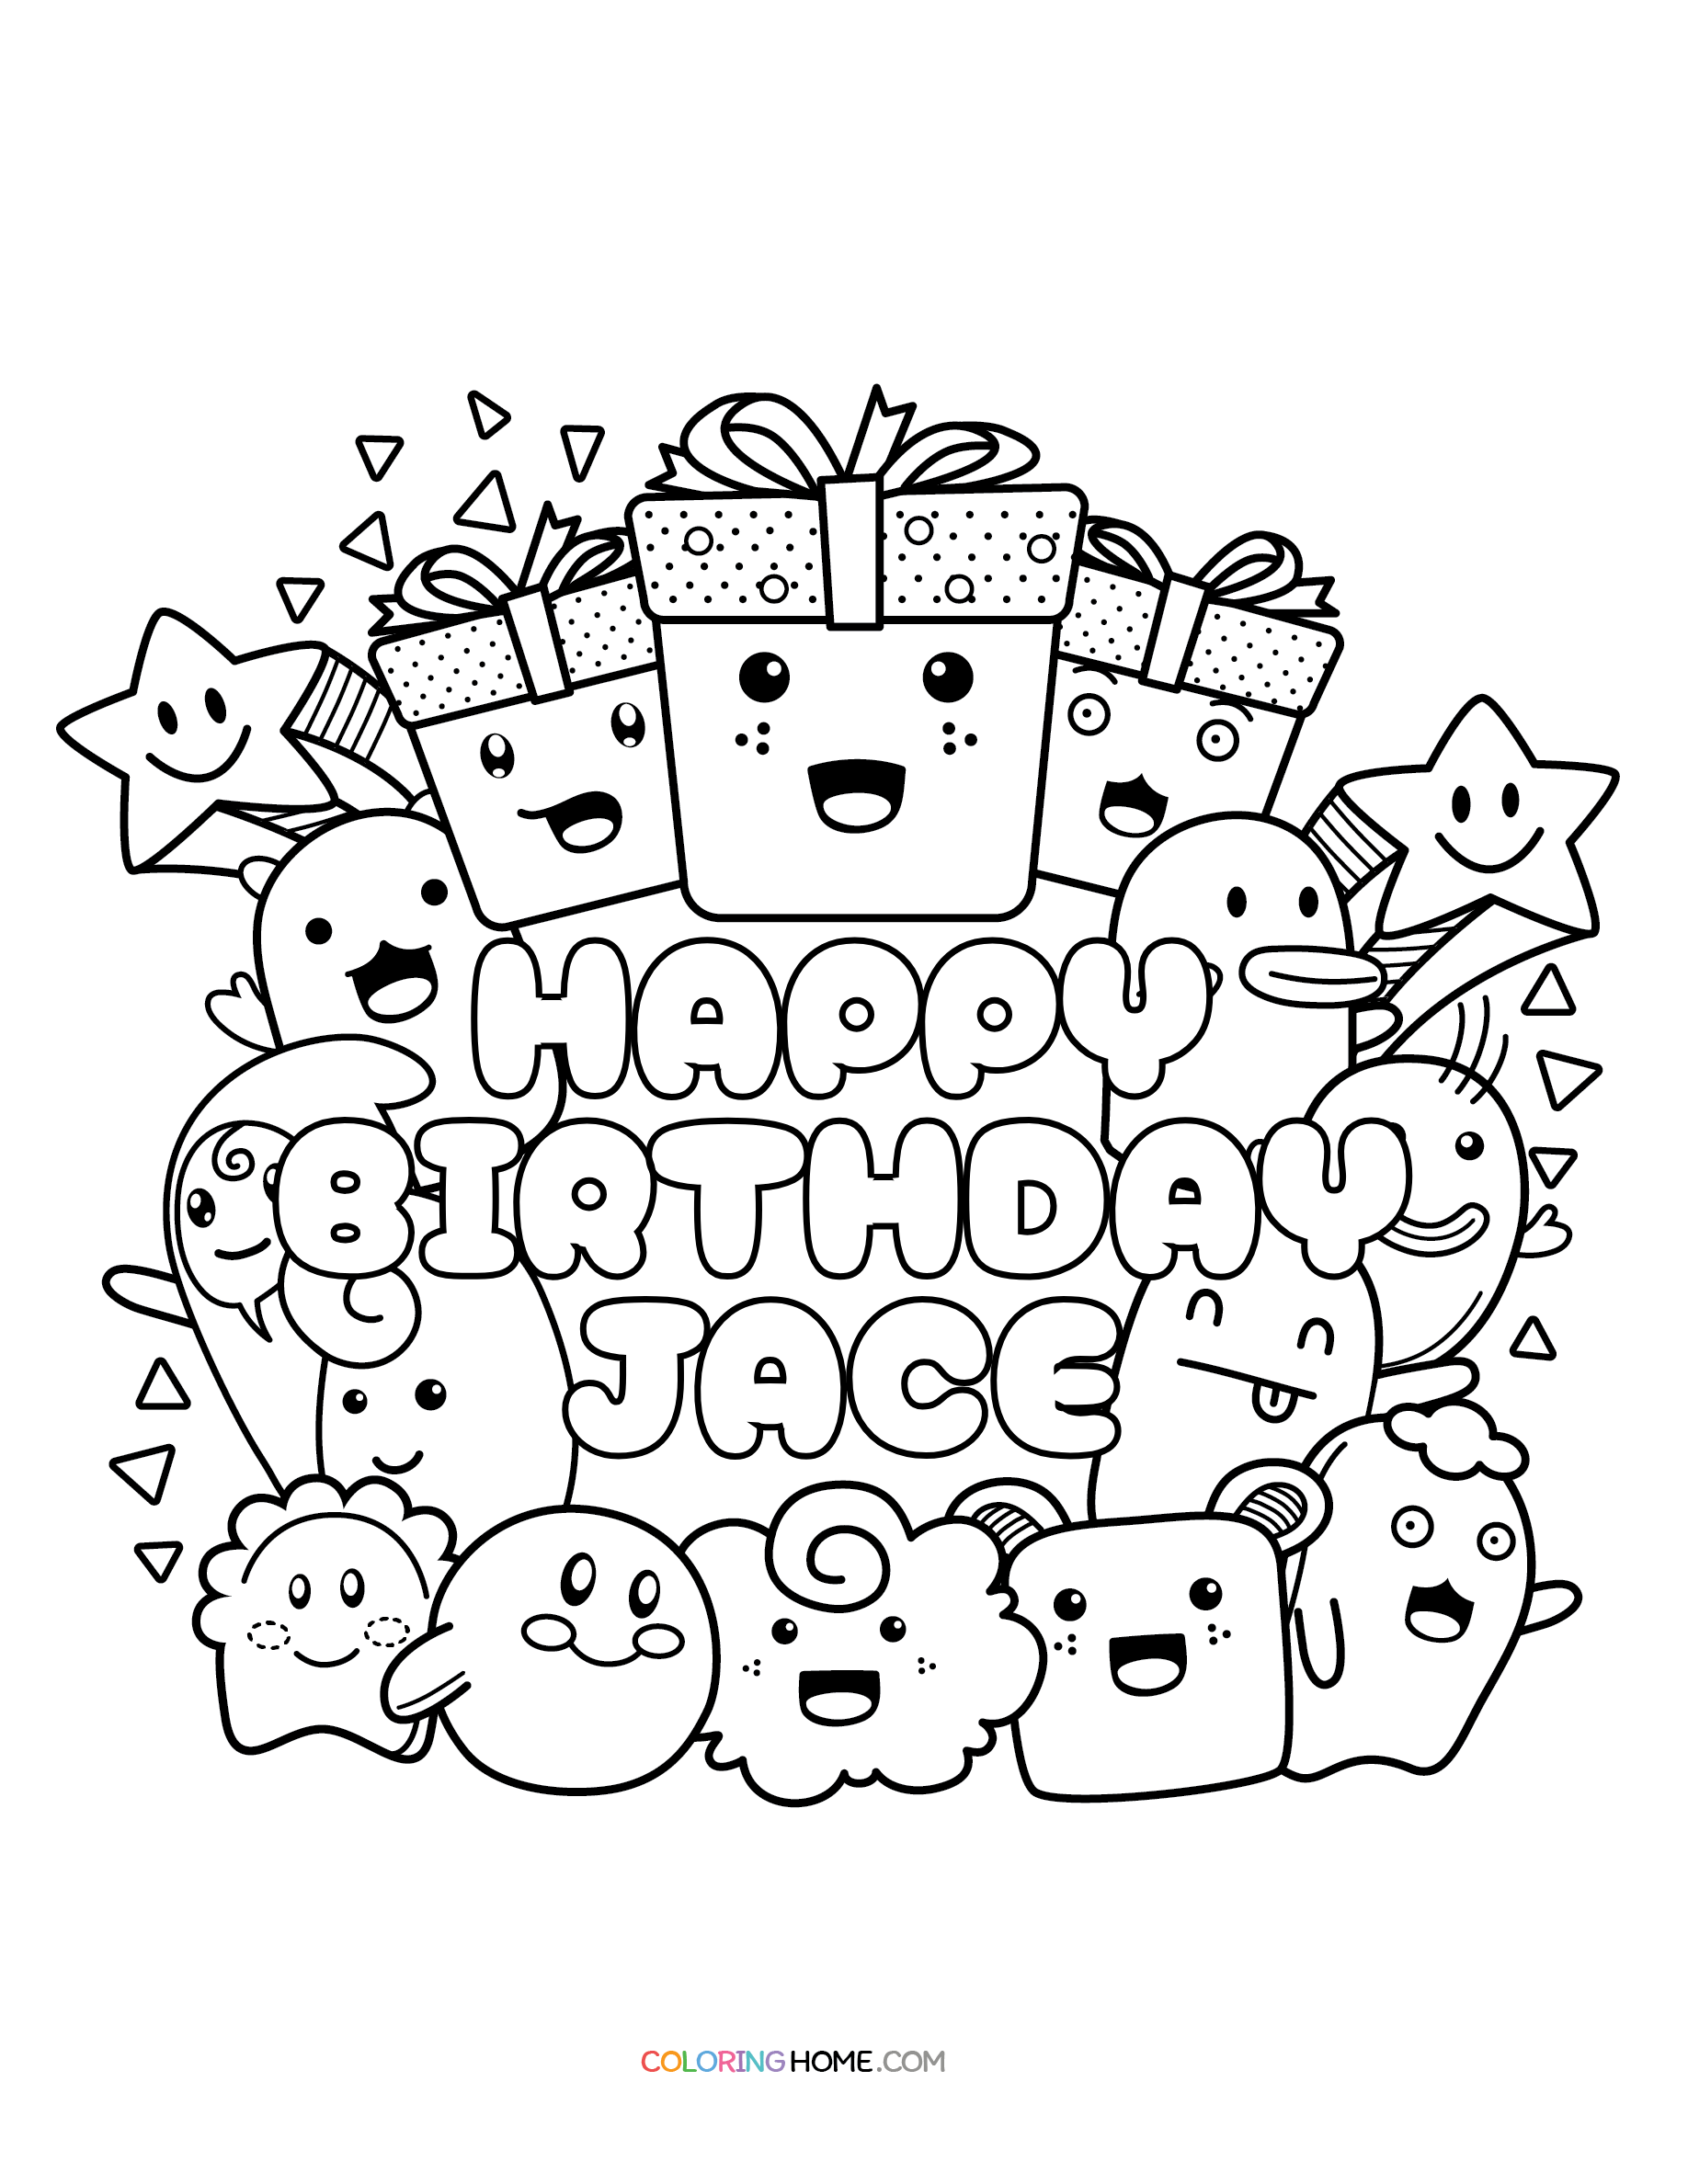 Happy Birthday Jace coloring page